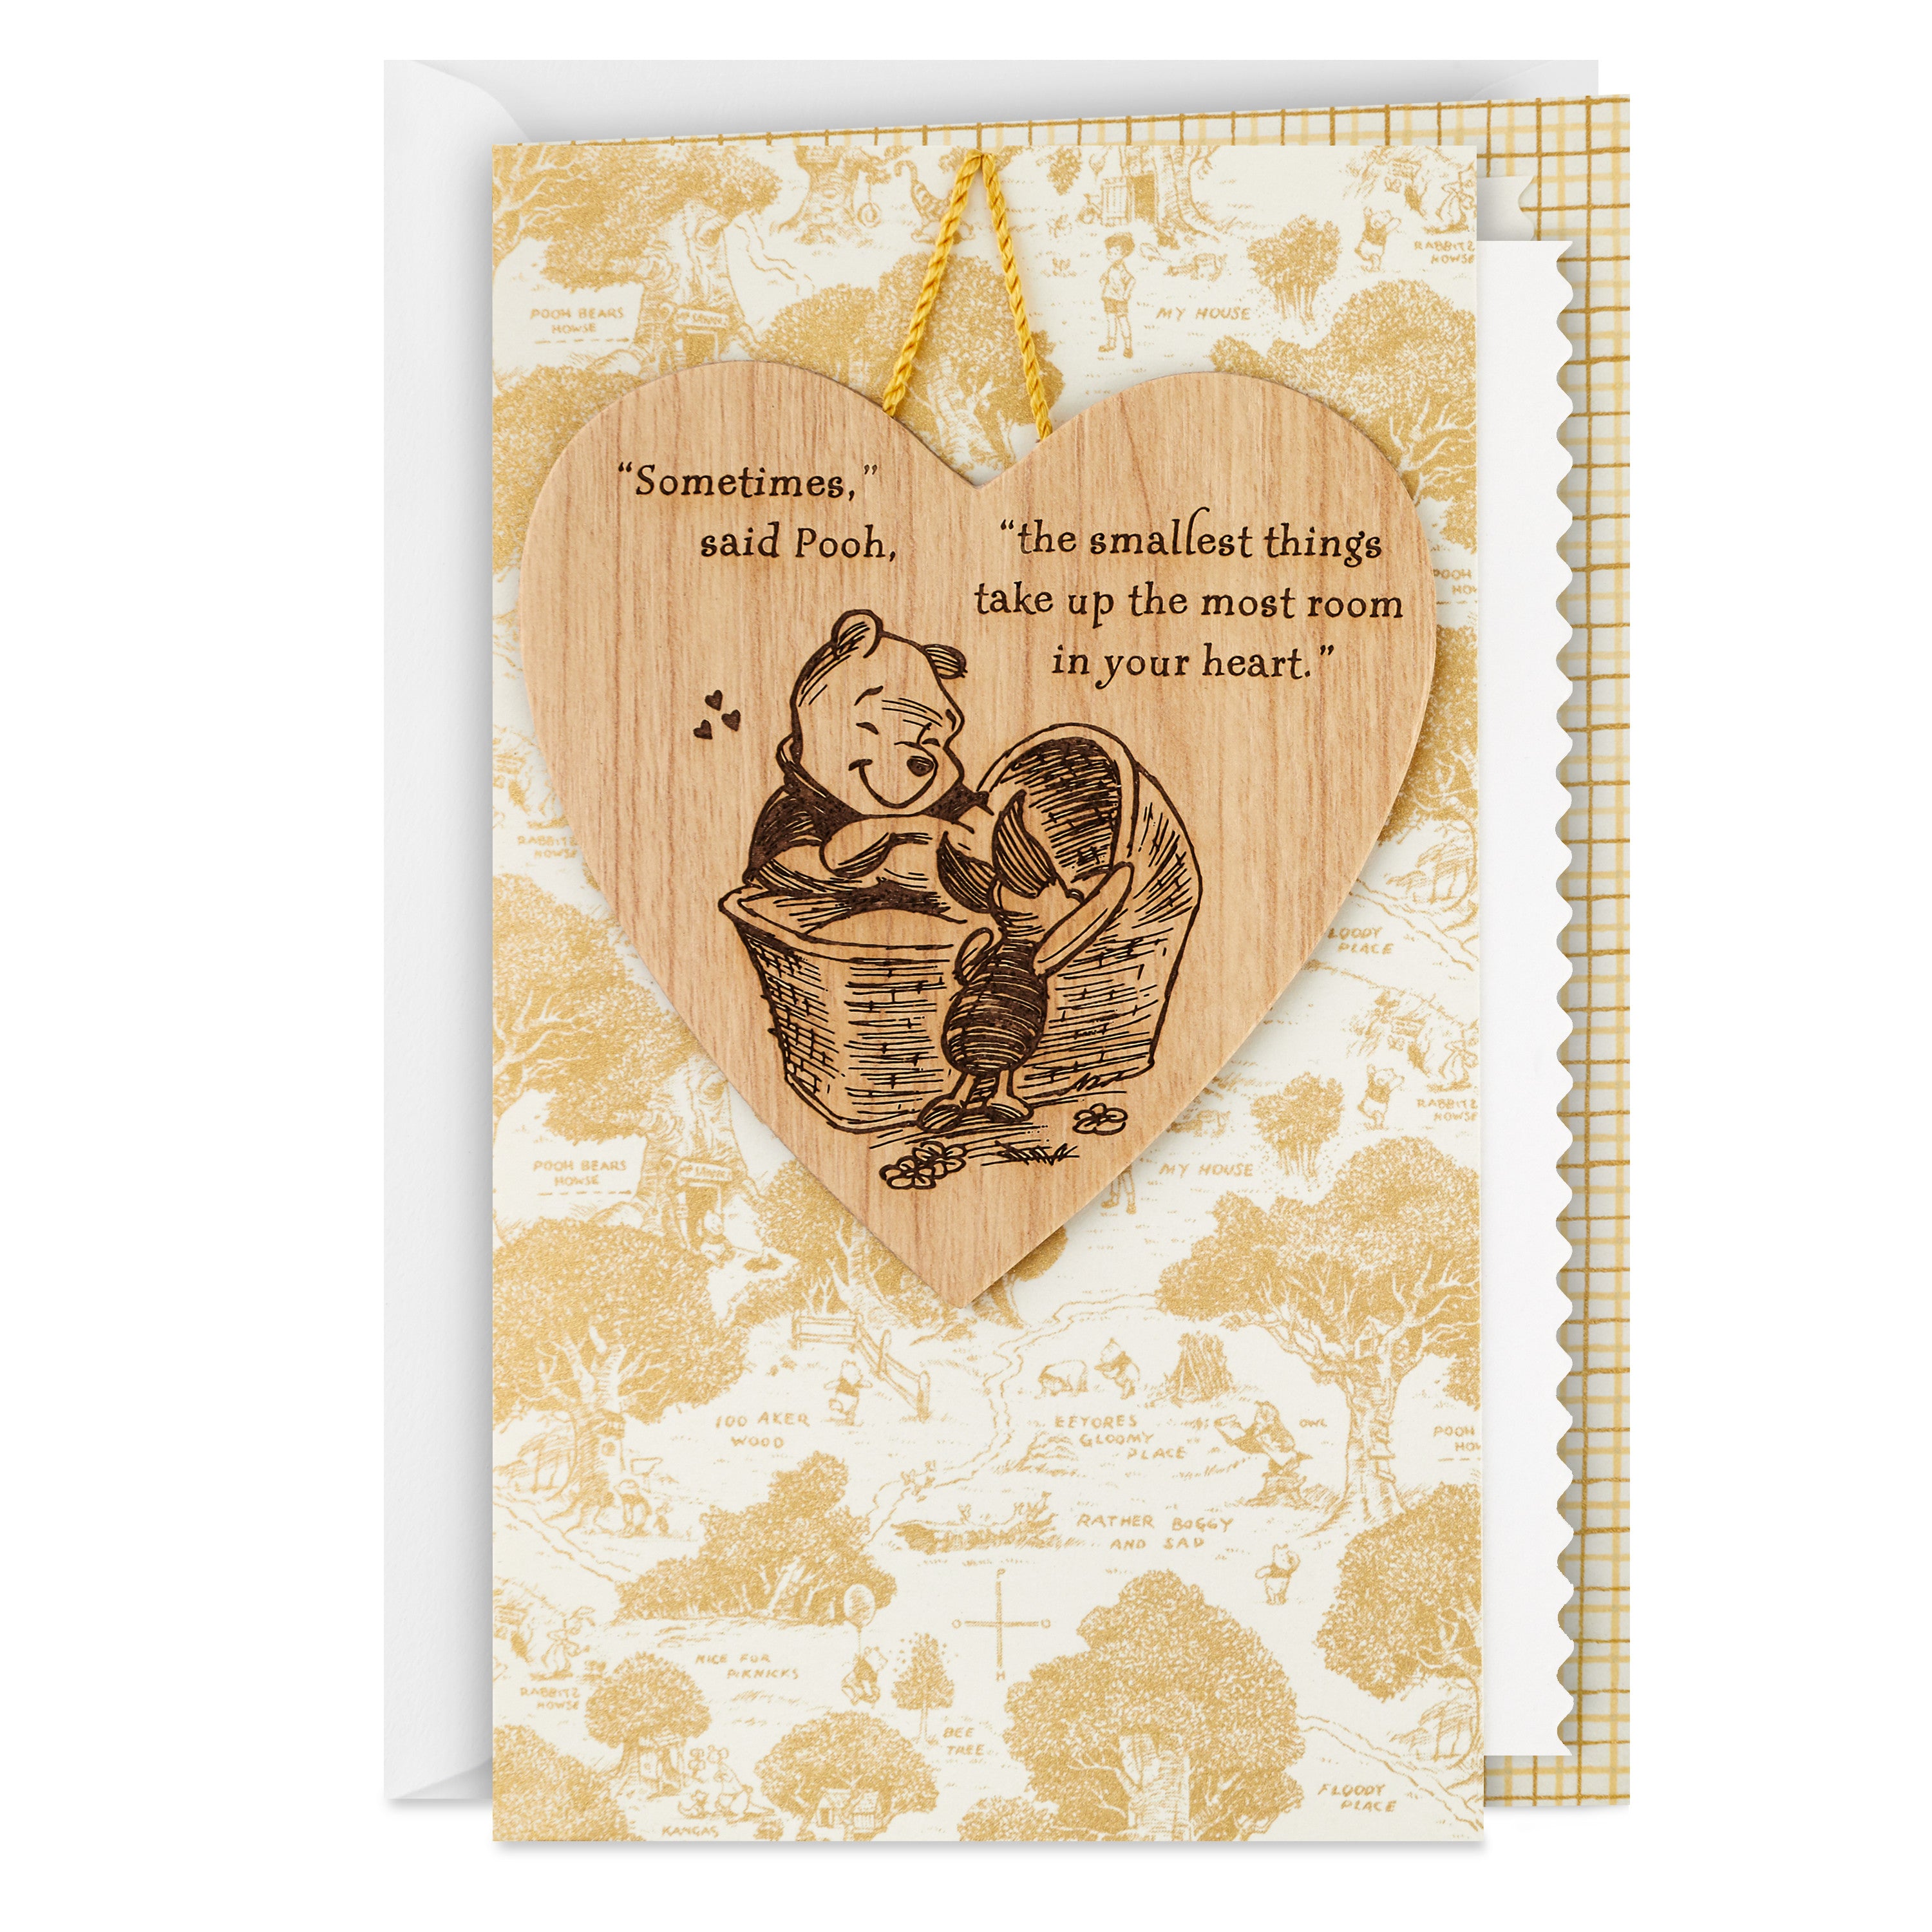 Hallmark Winnie the Pooh Baby Shower Card with Removable Ornament (Pooh and Piglet)